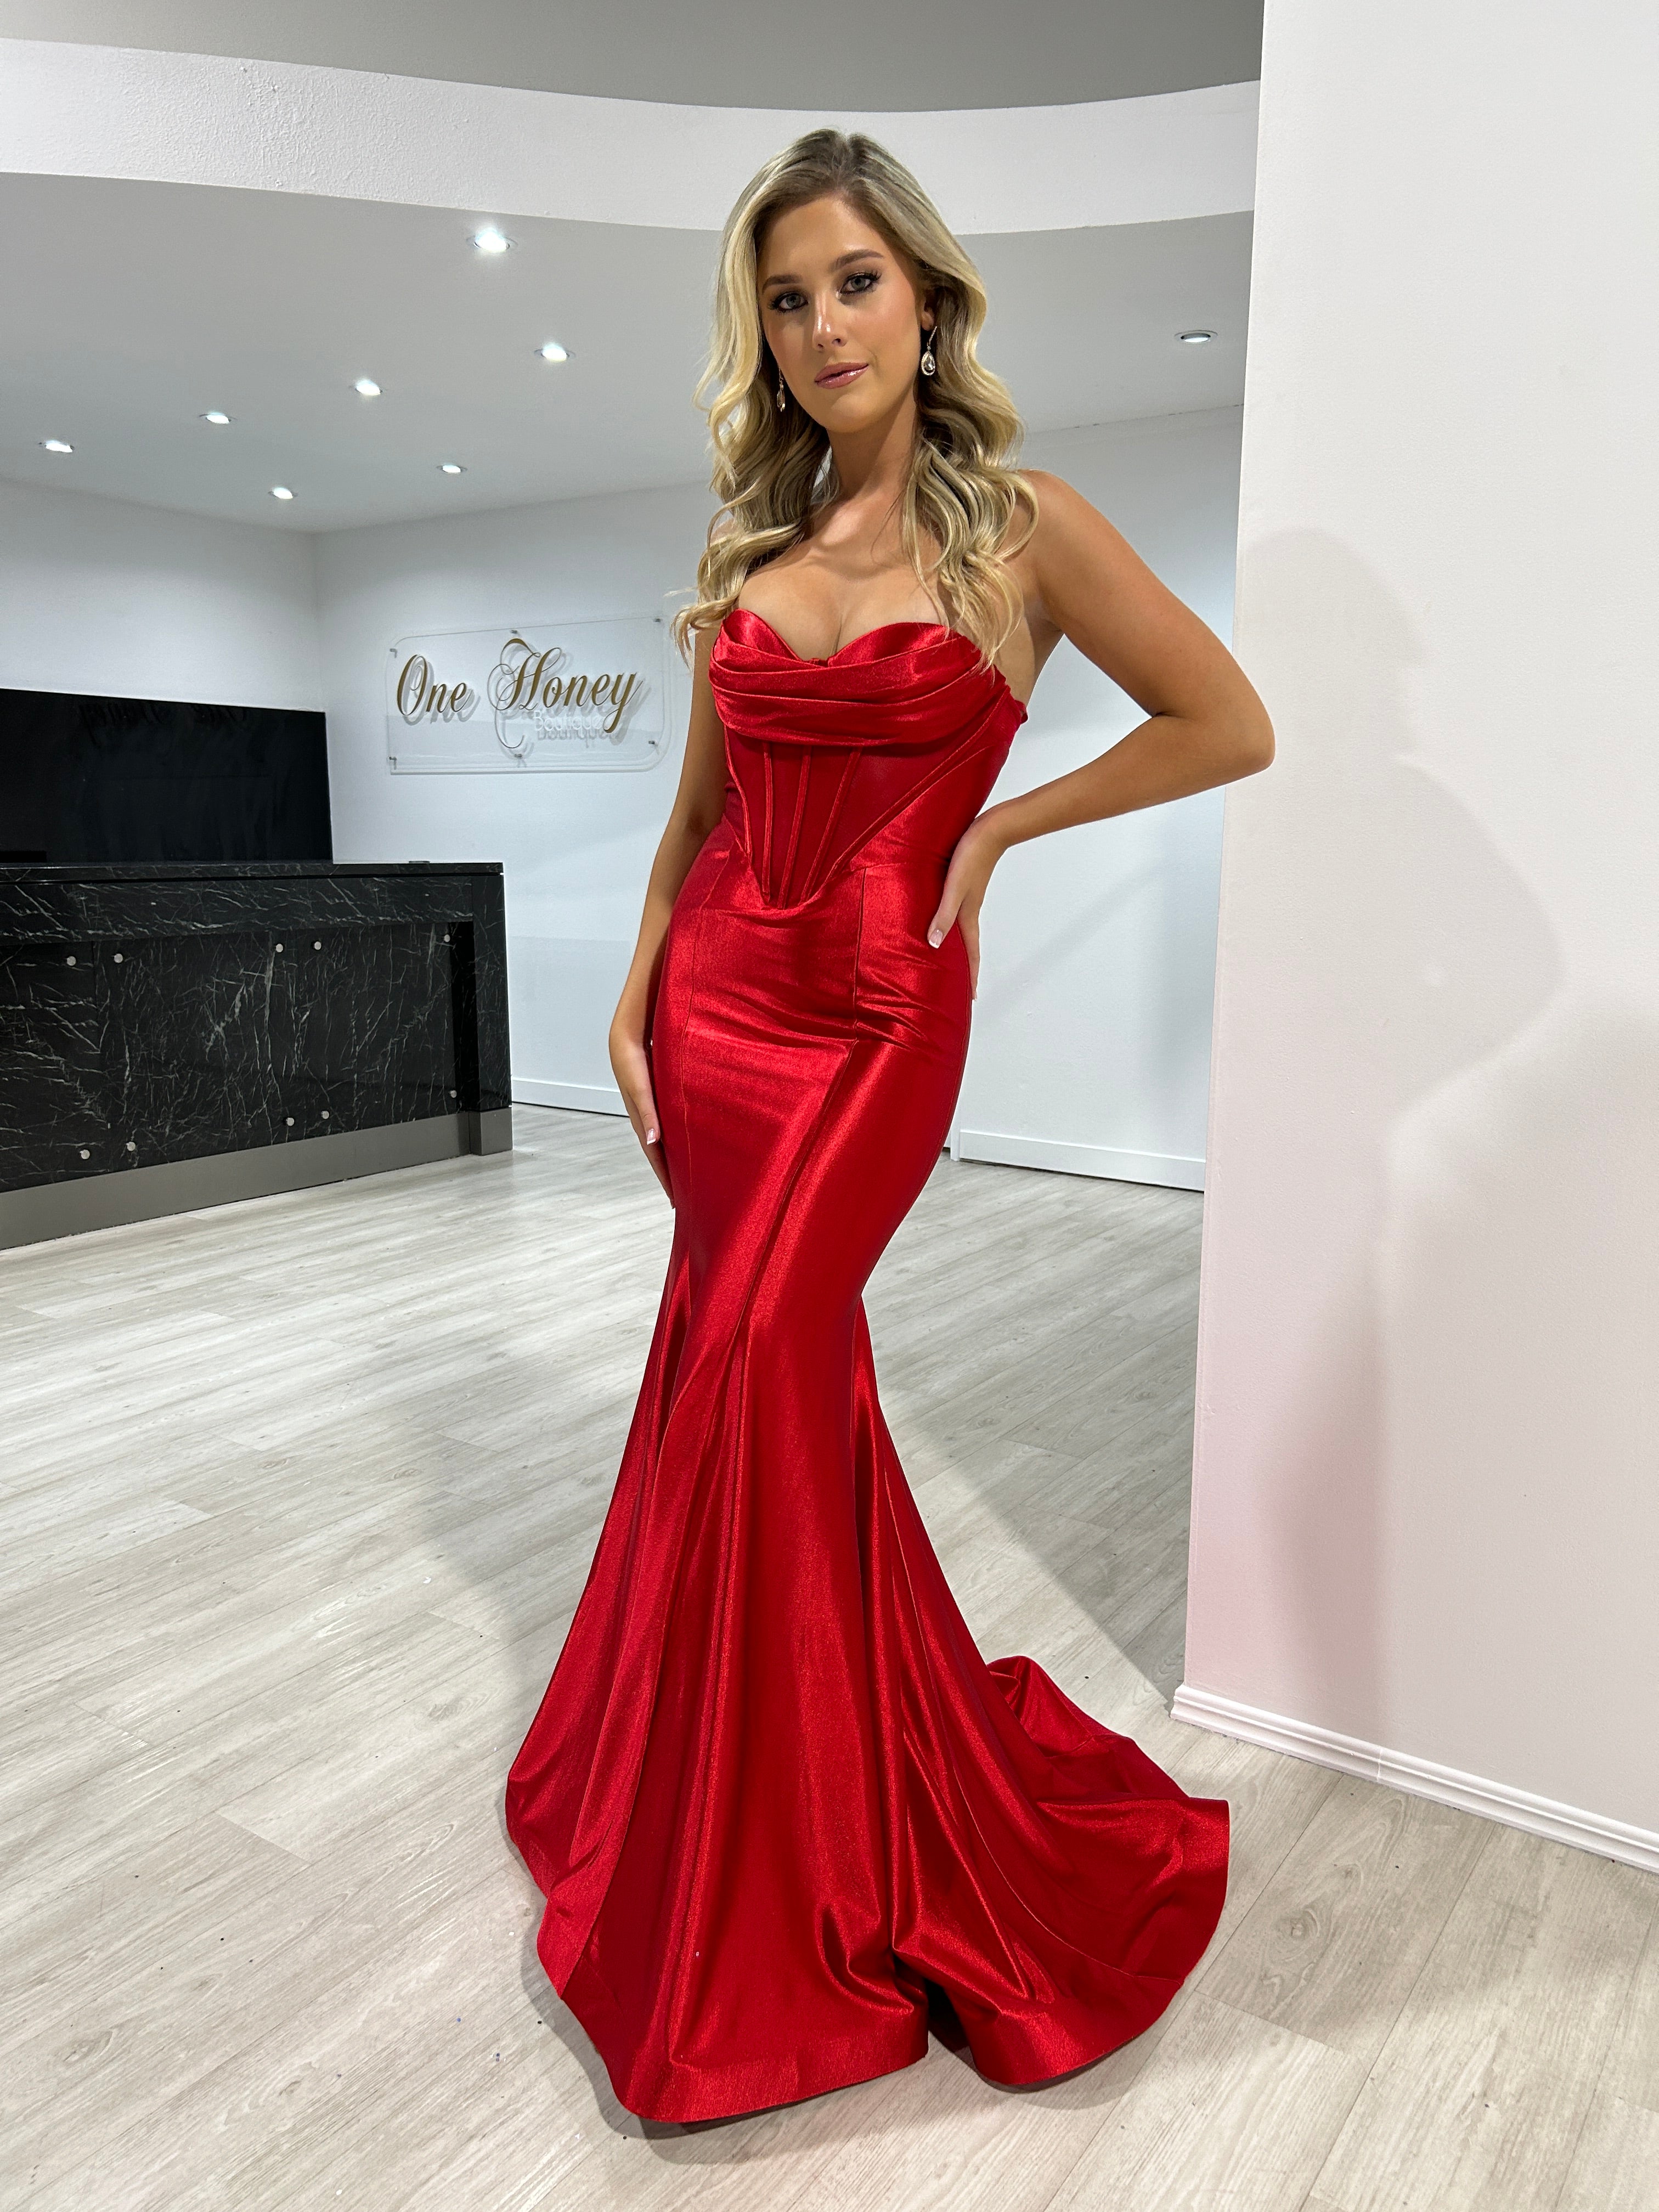 Honey Couture FUTURA Red Strapless Satin Corset Bustier Formal Dress